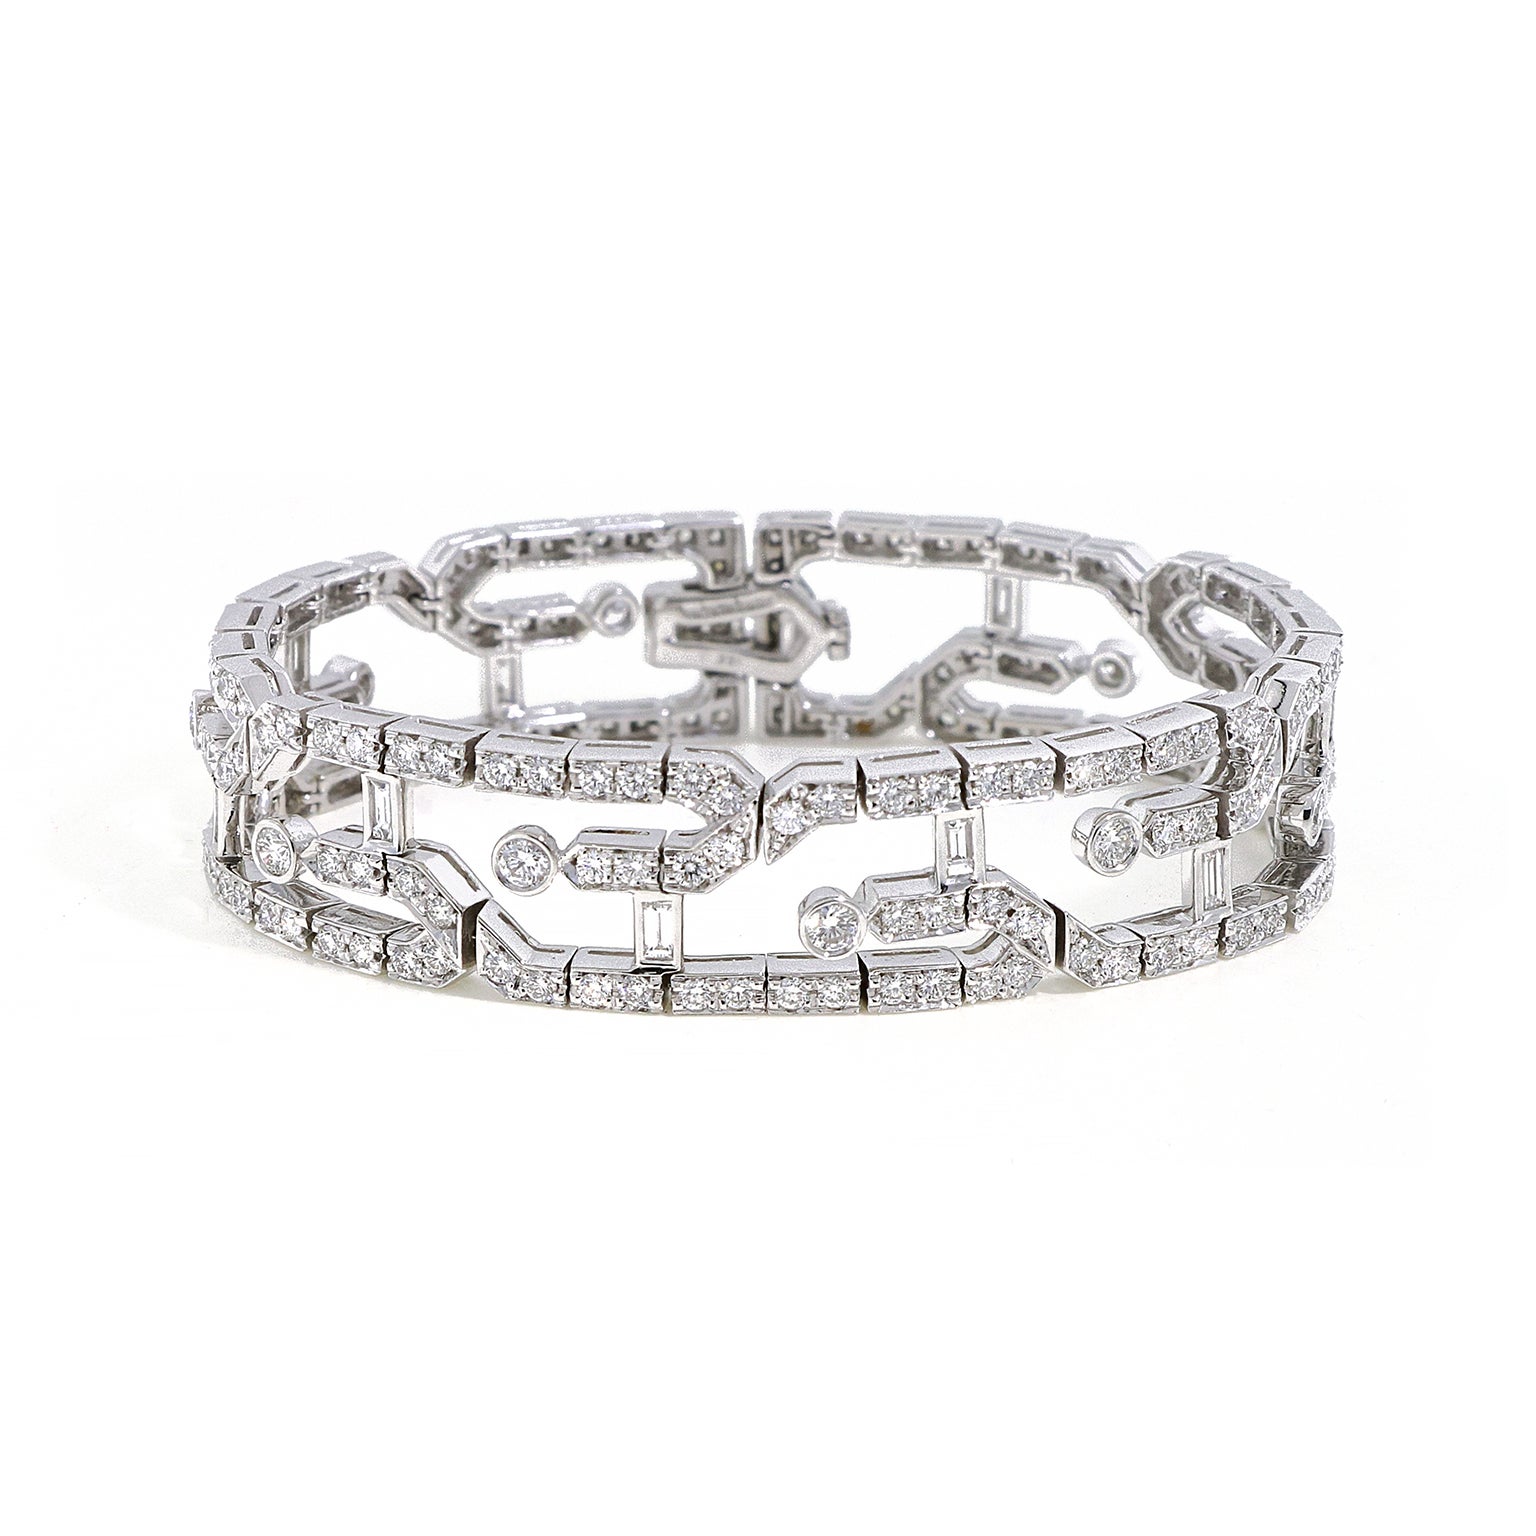 Influenced by the glamour of Art Deco, this bracelet glistens entirely with diamonds. Baguette cut diamonds form two parallel rows with every fifth diamond leading into a gentle curve inward. The result is an openwork pattern of staggered diamonds.